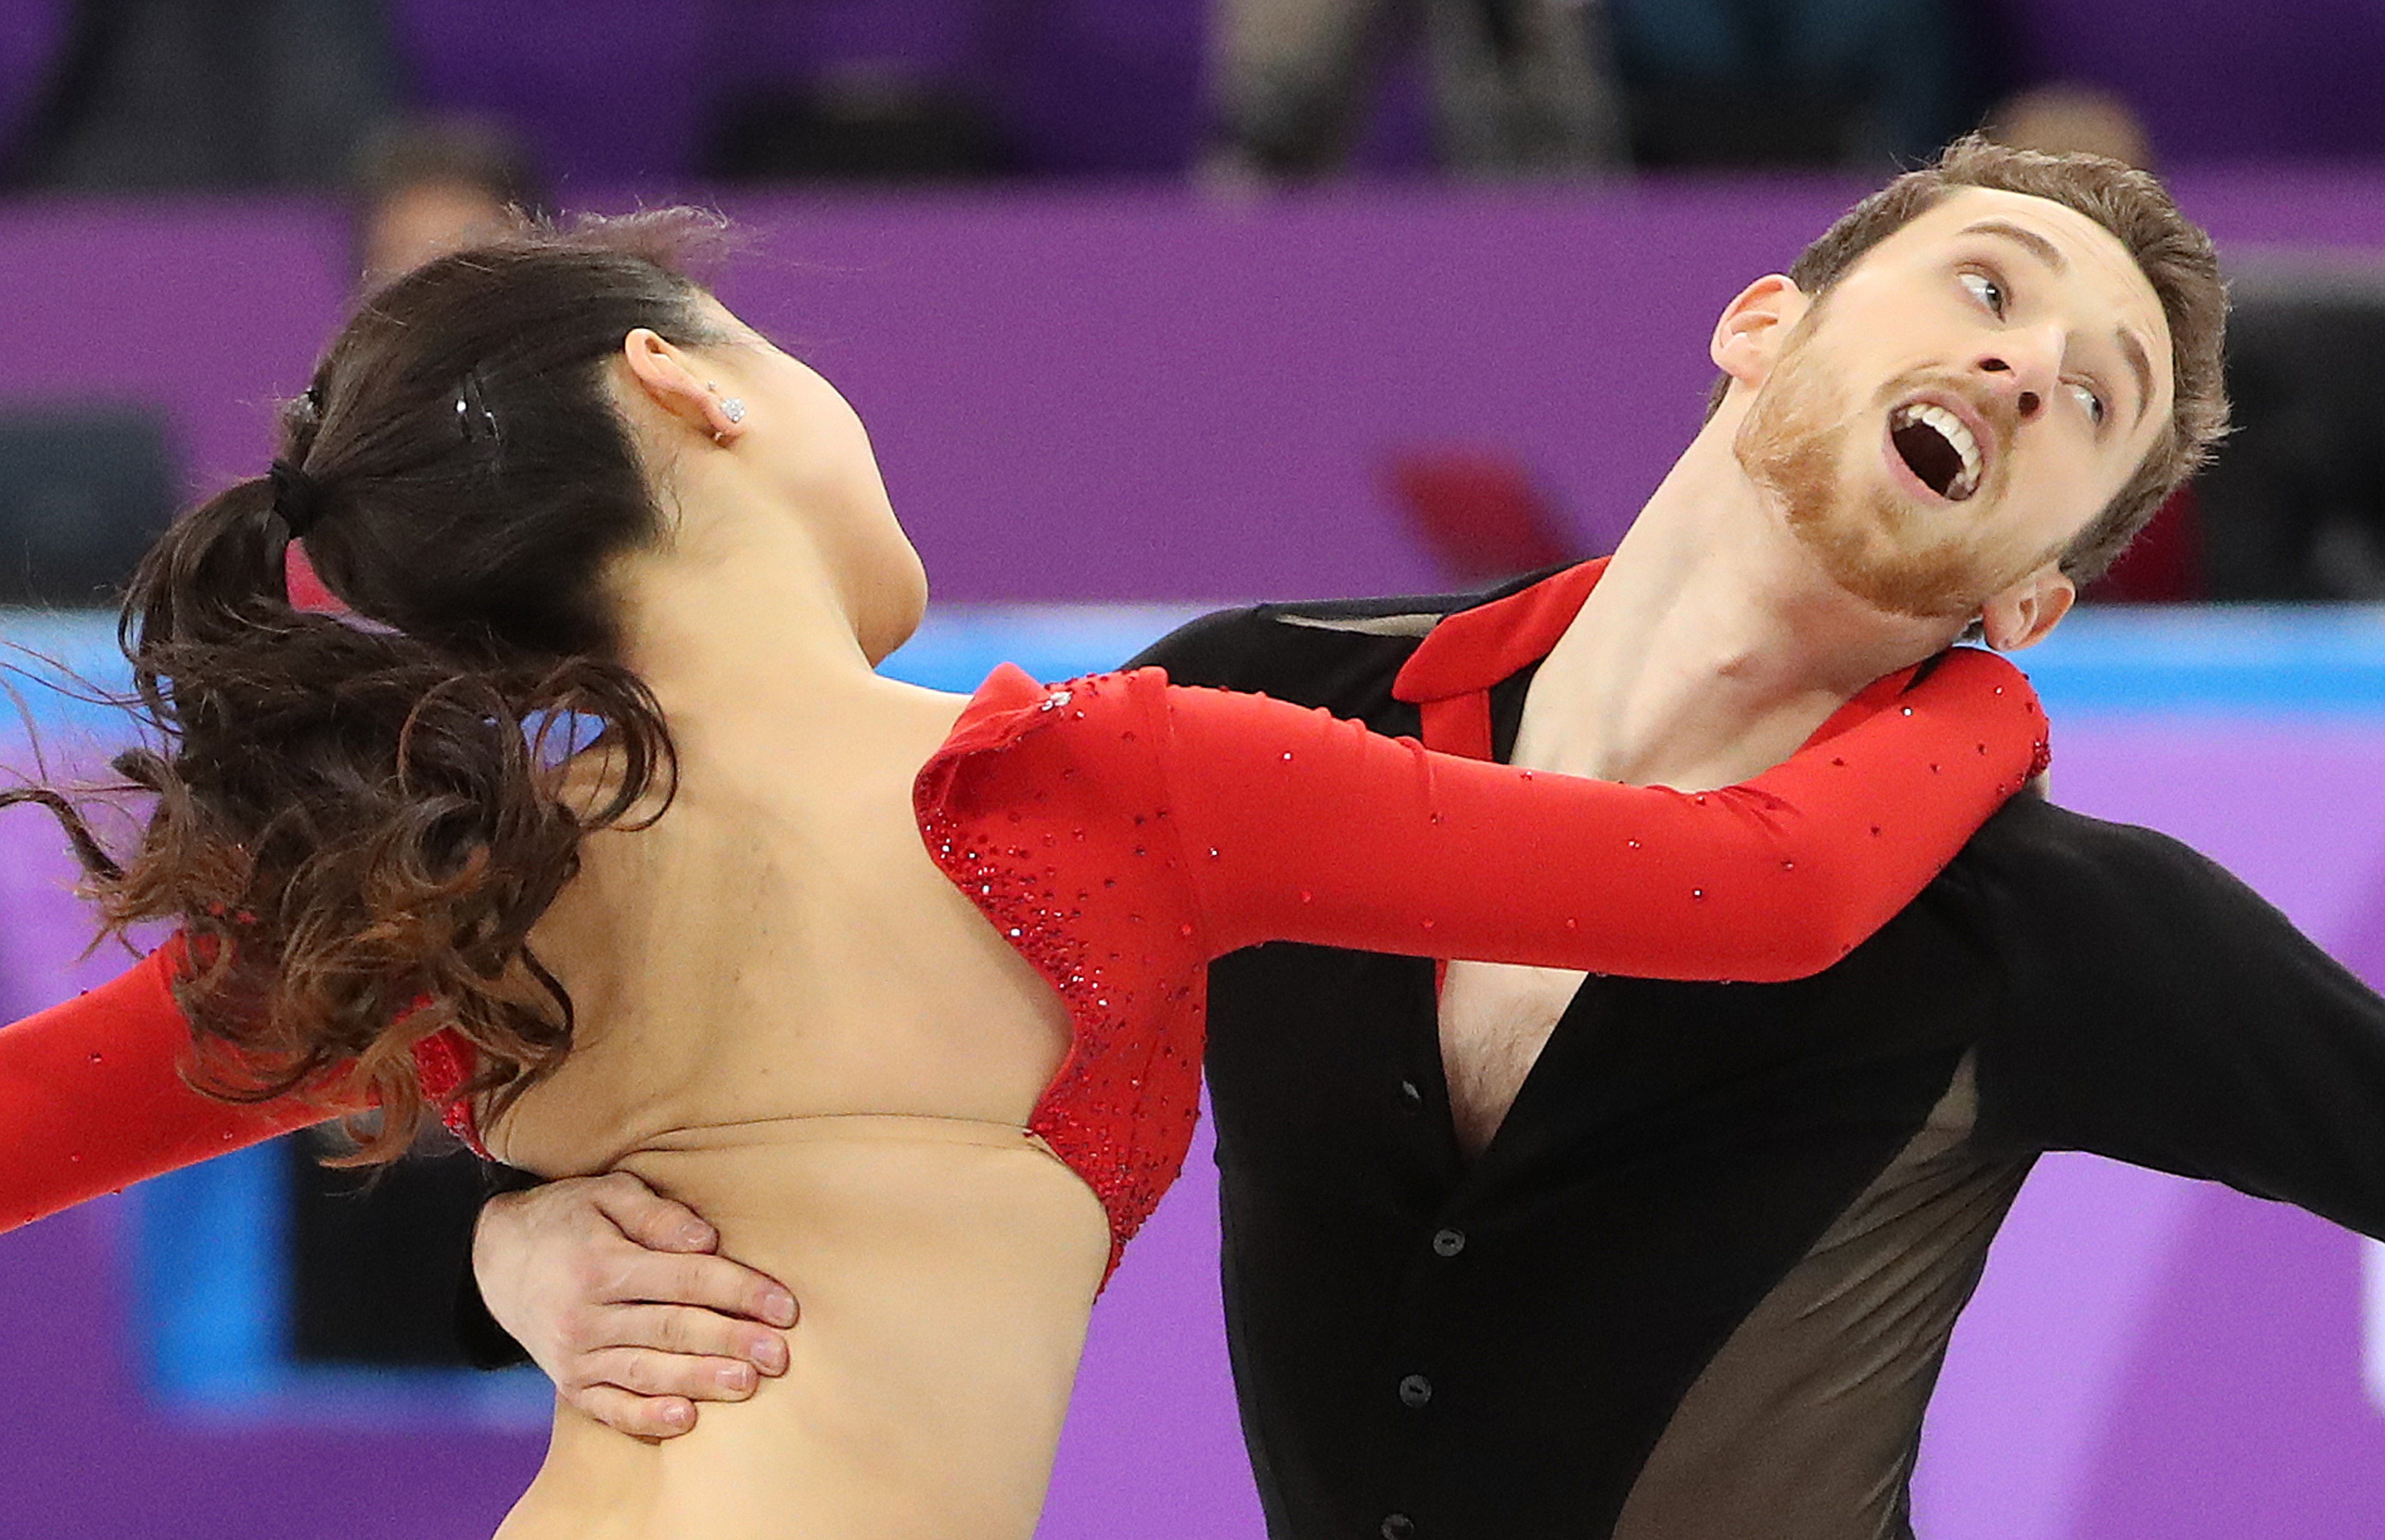 2018-02-11 10:09:10 epa06514005 Yura Min has a clasp in her costume come undone (C) as she and Alexander Gamelin of South Korea compete during the Ice Dance Short Dance of the Figure Skating Team Event competition at the Gangneung Ice Arena during the PyeongChang 2018 Olympic Games, South Korea, 11 February 2018. EPA/TATYANA ZENKOVICH